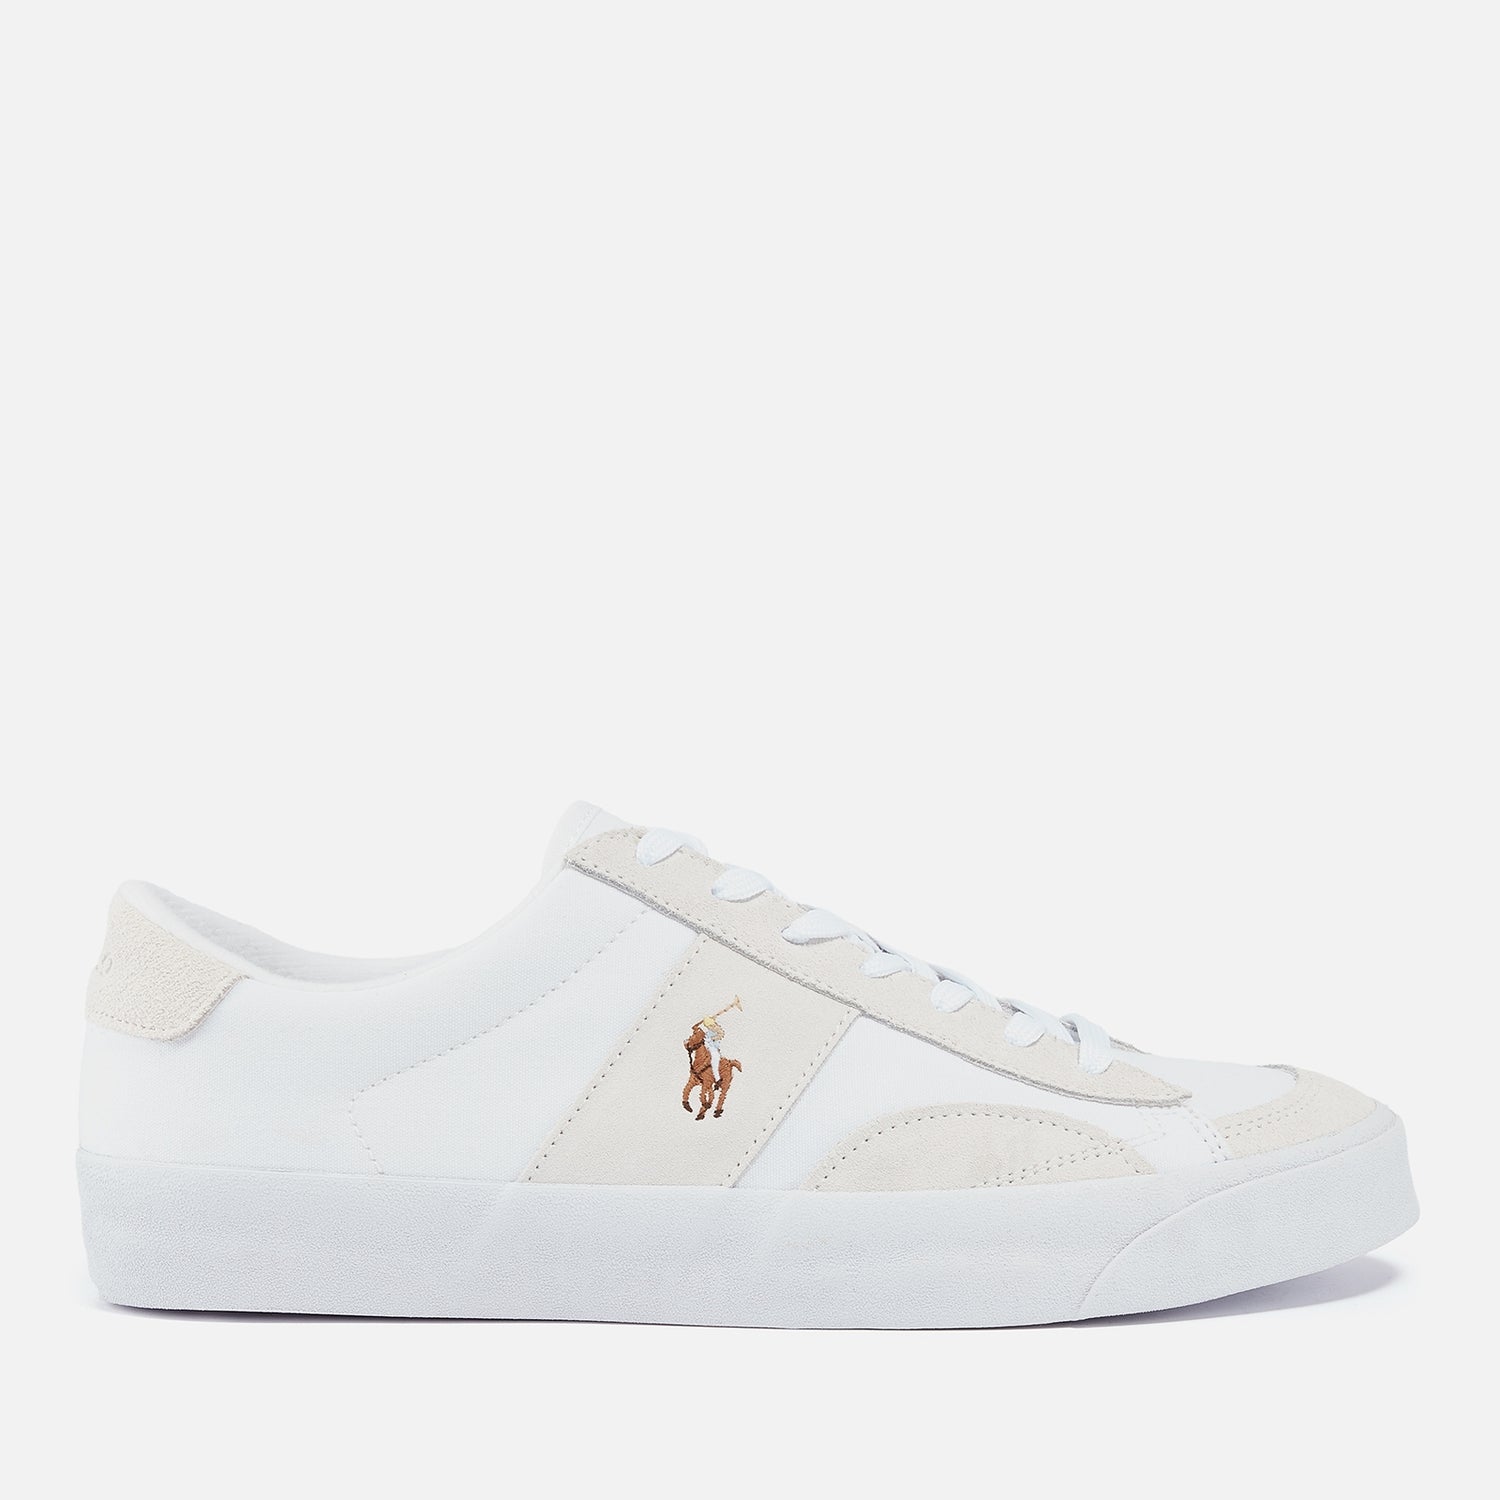 Polo Ralph Lauren Men's Sayer Canvas and Suede Trainers - UK 9